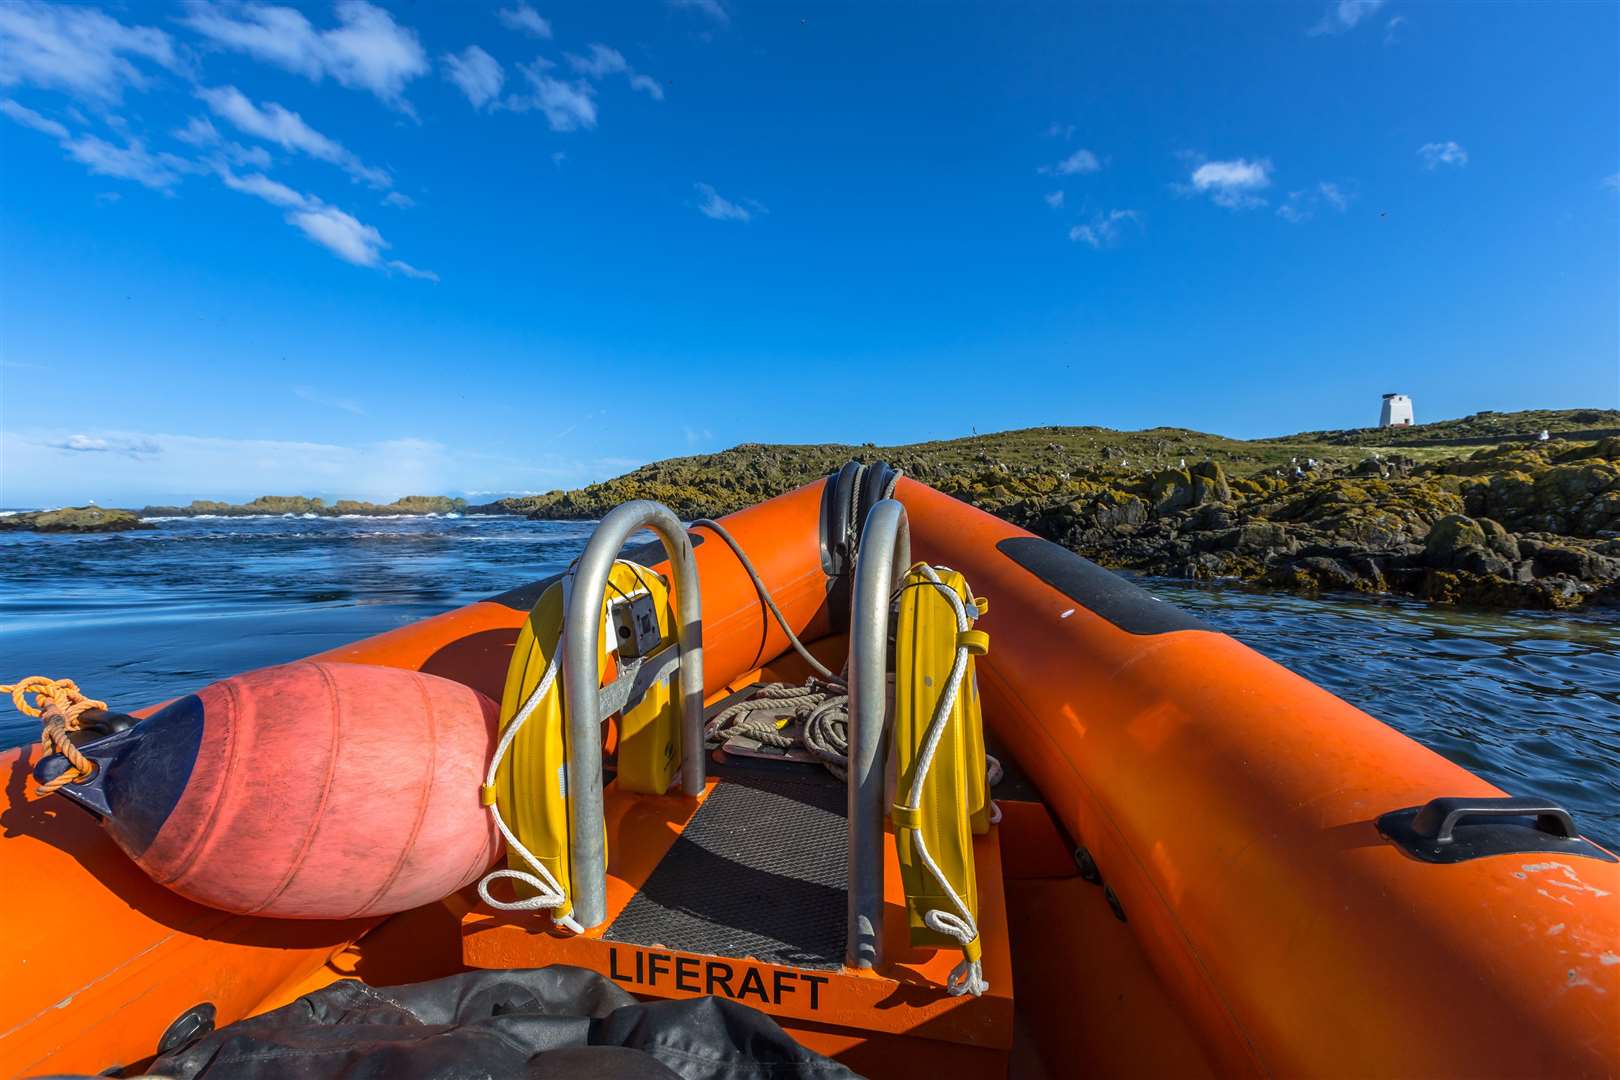 The liferaft appeared to have been abandoned.